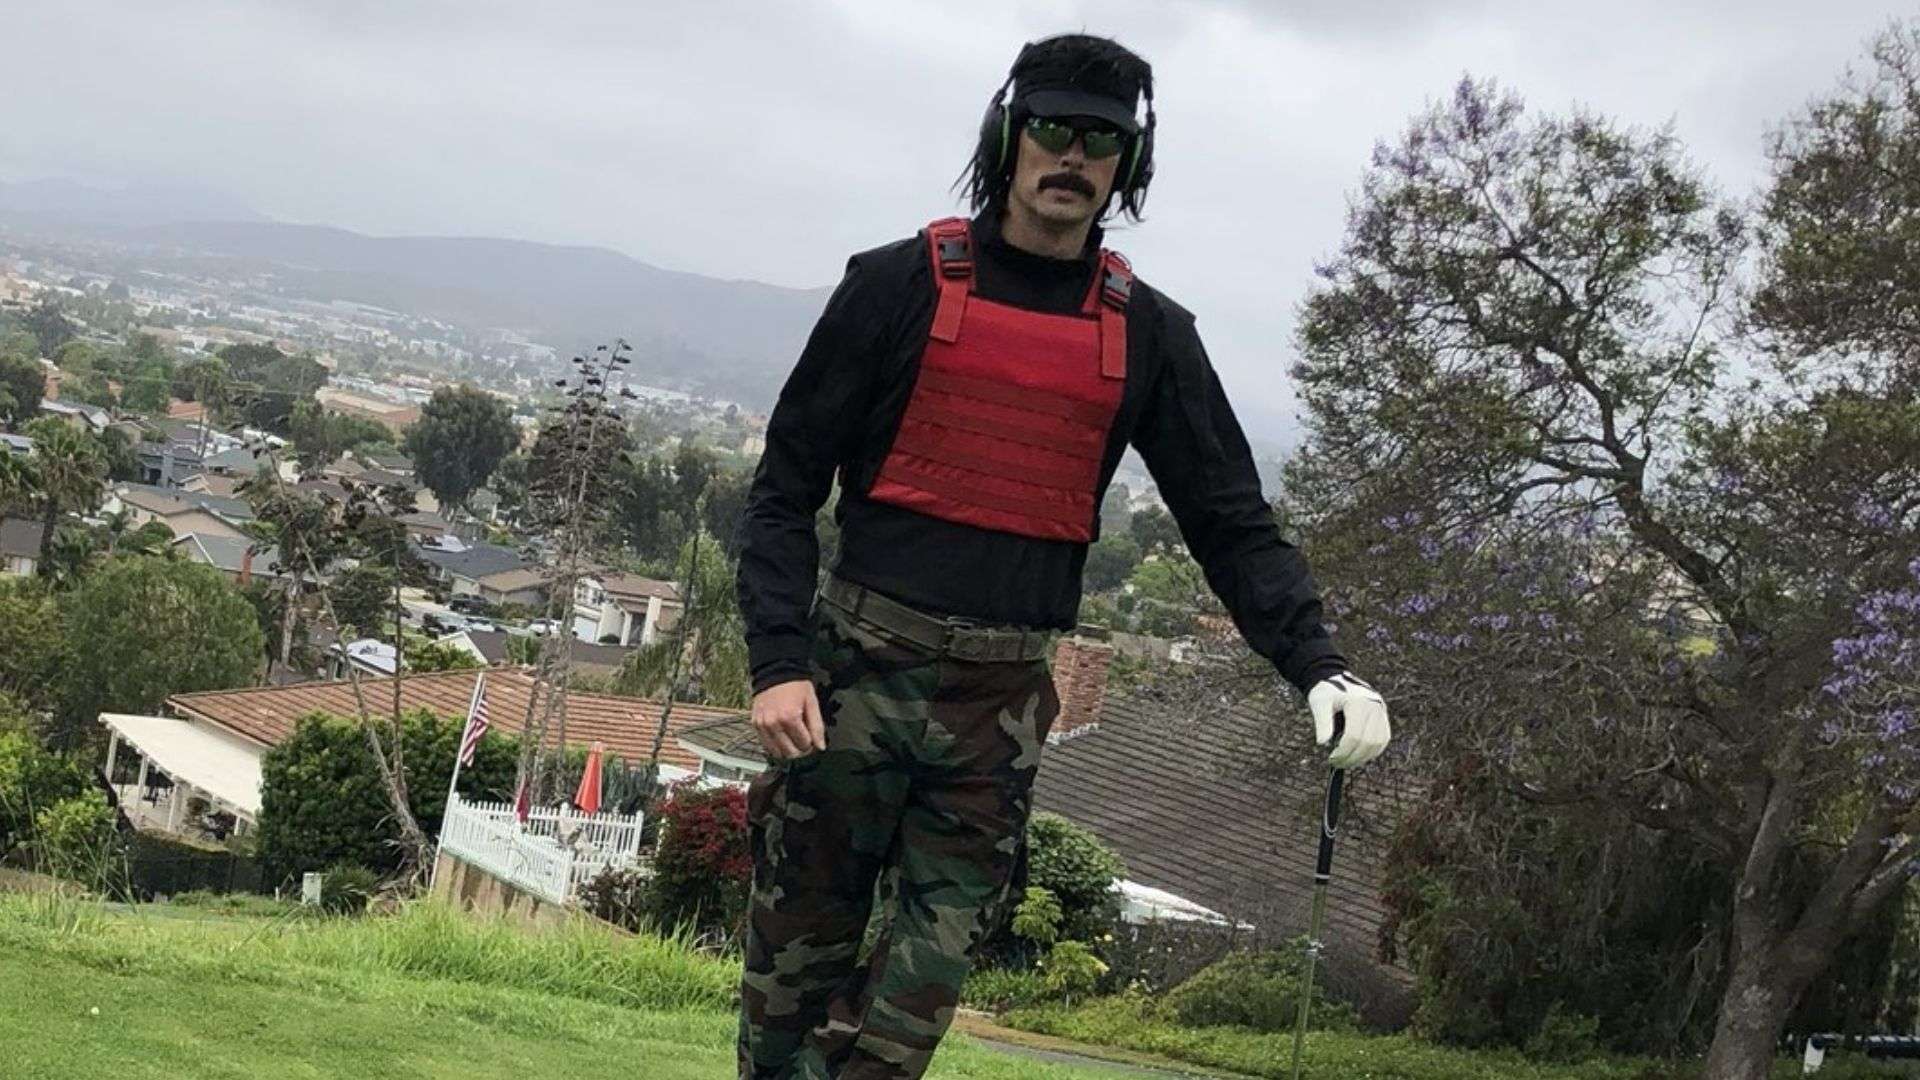 Dr Disrespect playing golf